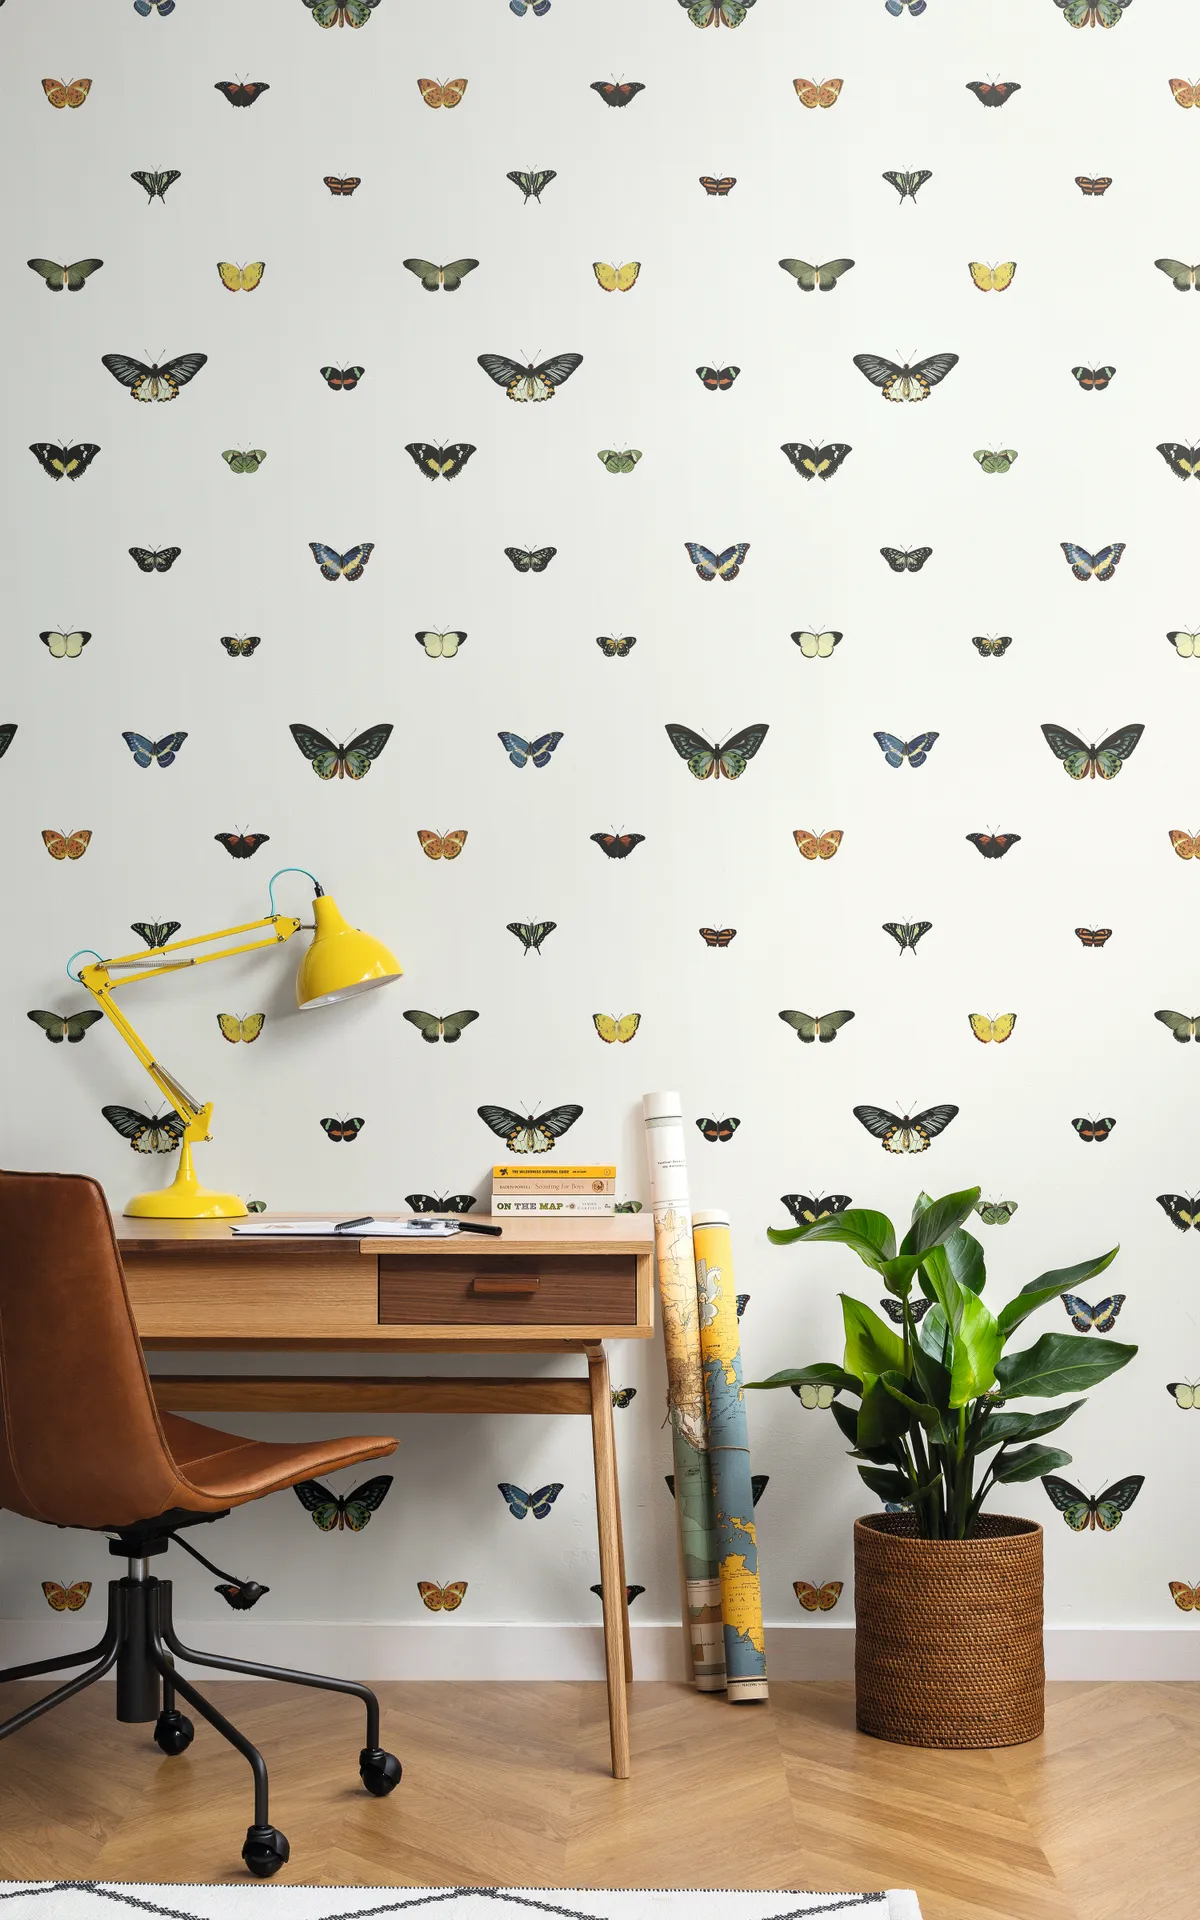 Butterfly-patterned wallpaper in a home office